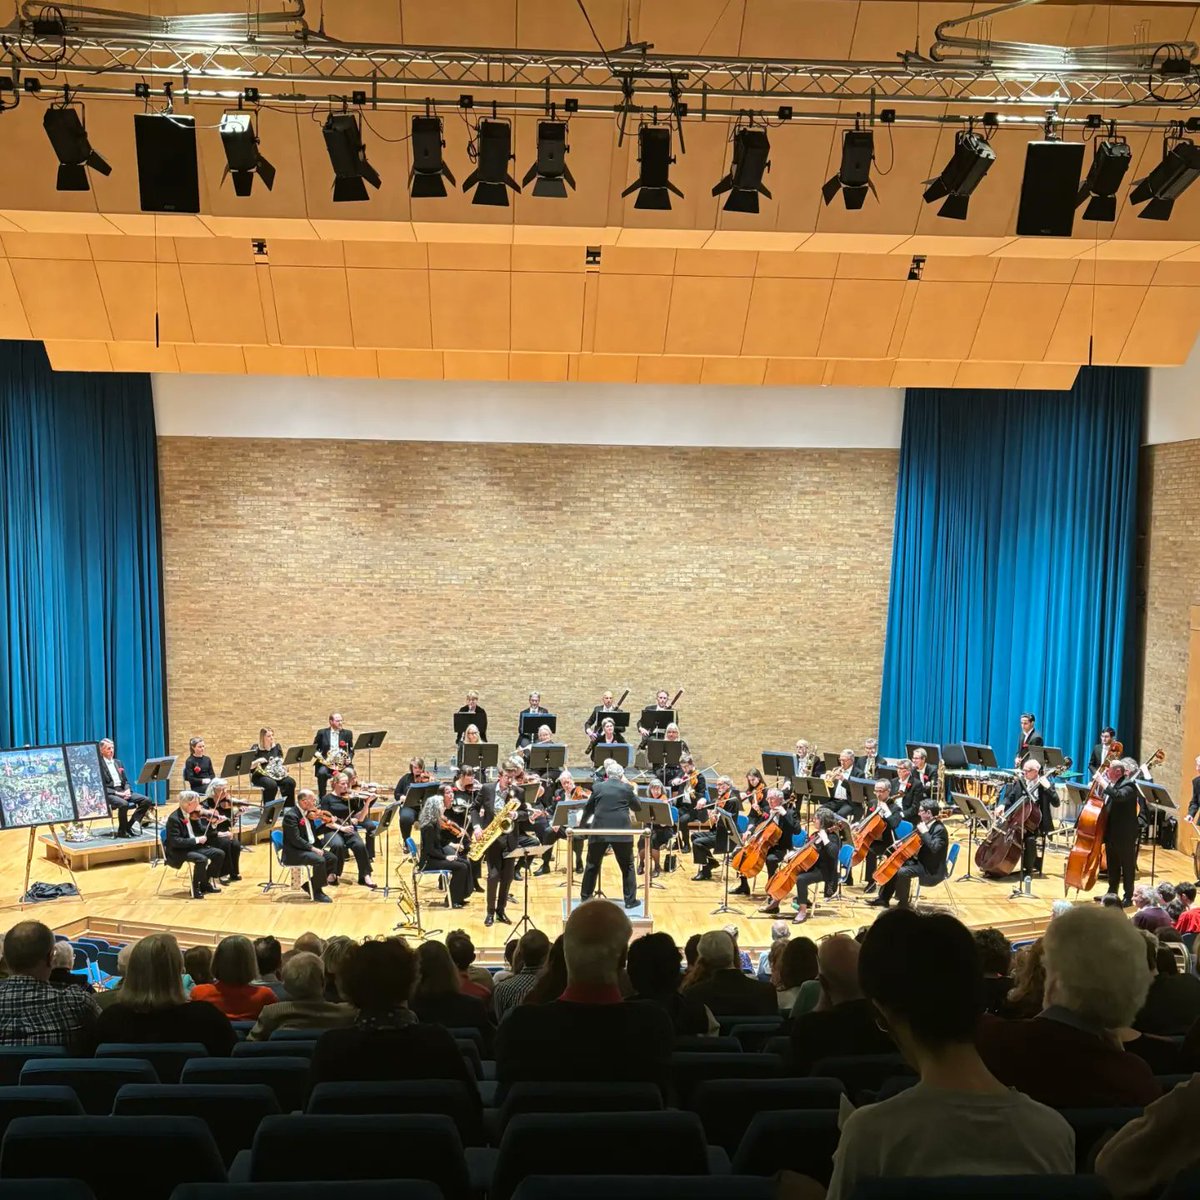 Fantastic time performing with the Sampson Orchestra of Cambridge on Saturday night, giving another performance of Darrell Davison's triple saxophone concerto 'The Garden of Earthly Delights' 🎷🎷🎷🌱🌿🌷